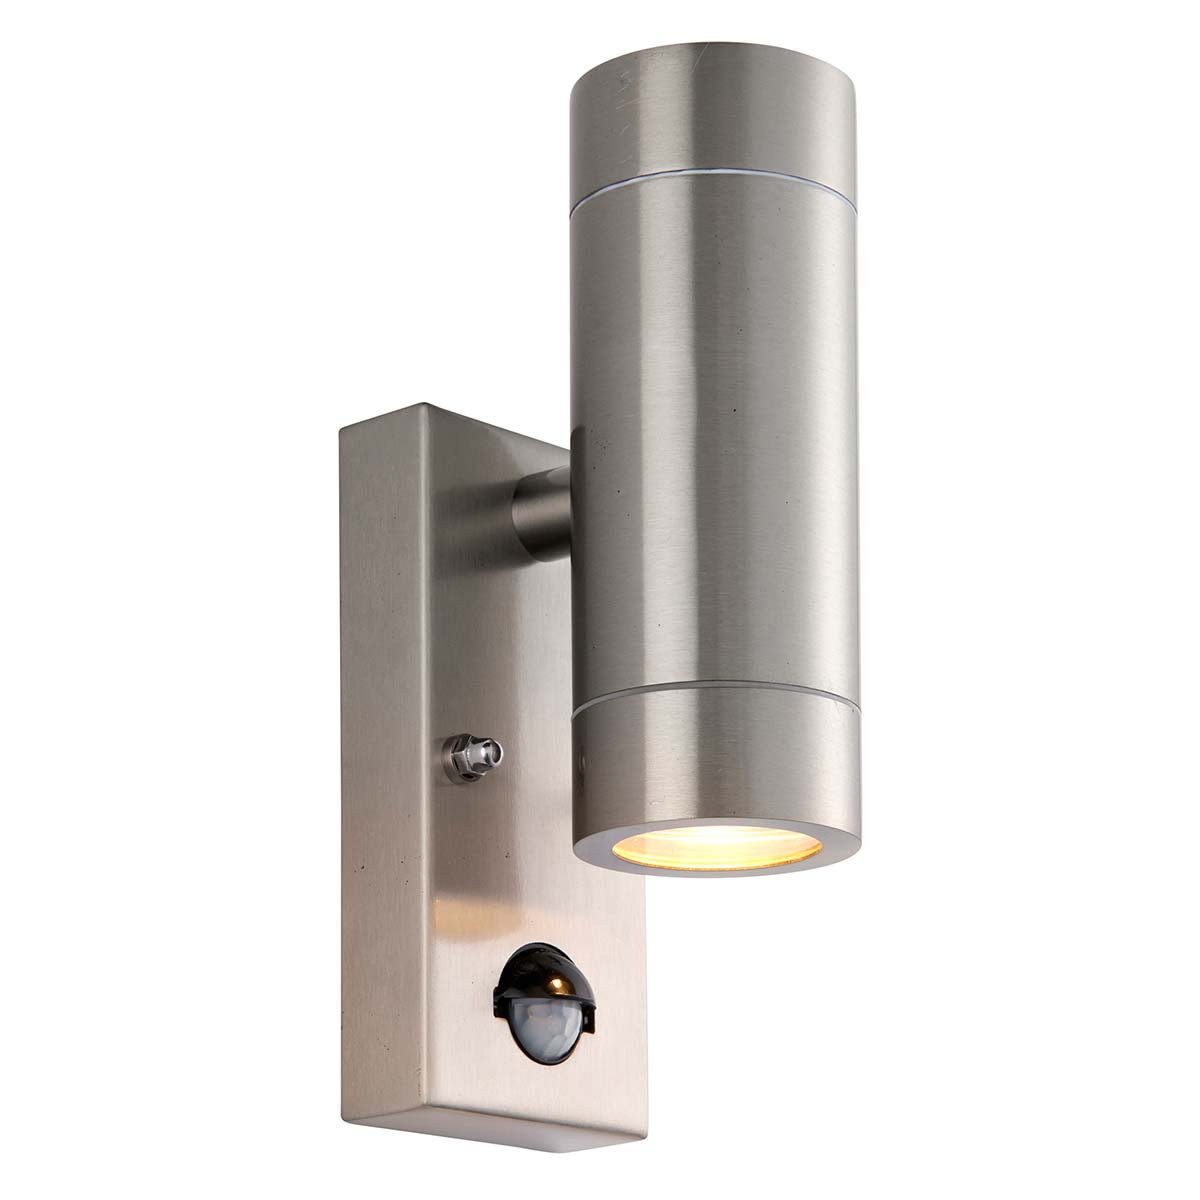 Palin 316 Stainless Steel PIR Wall Up and Down Light Override